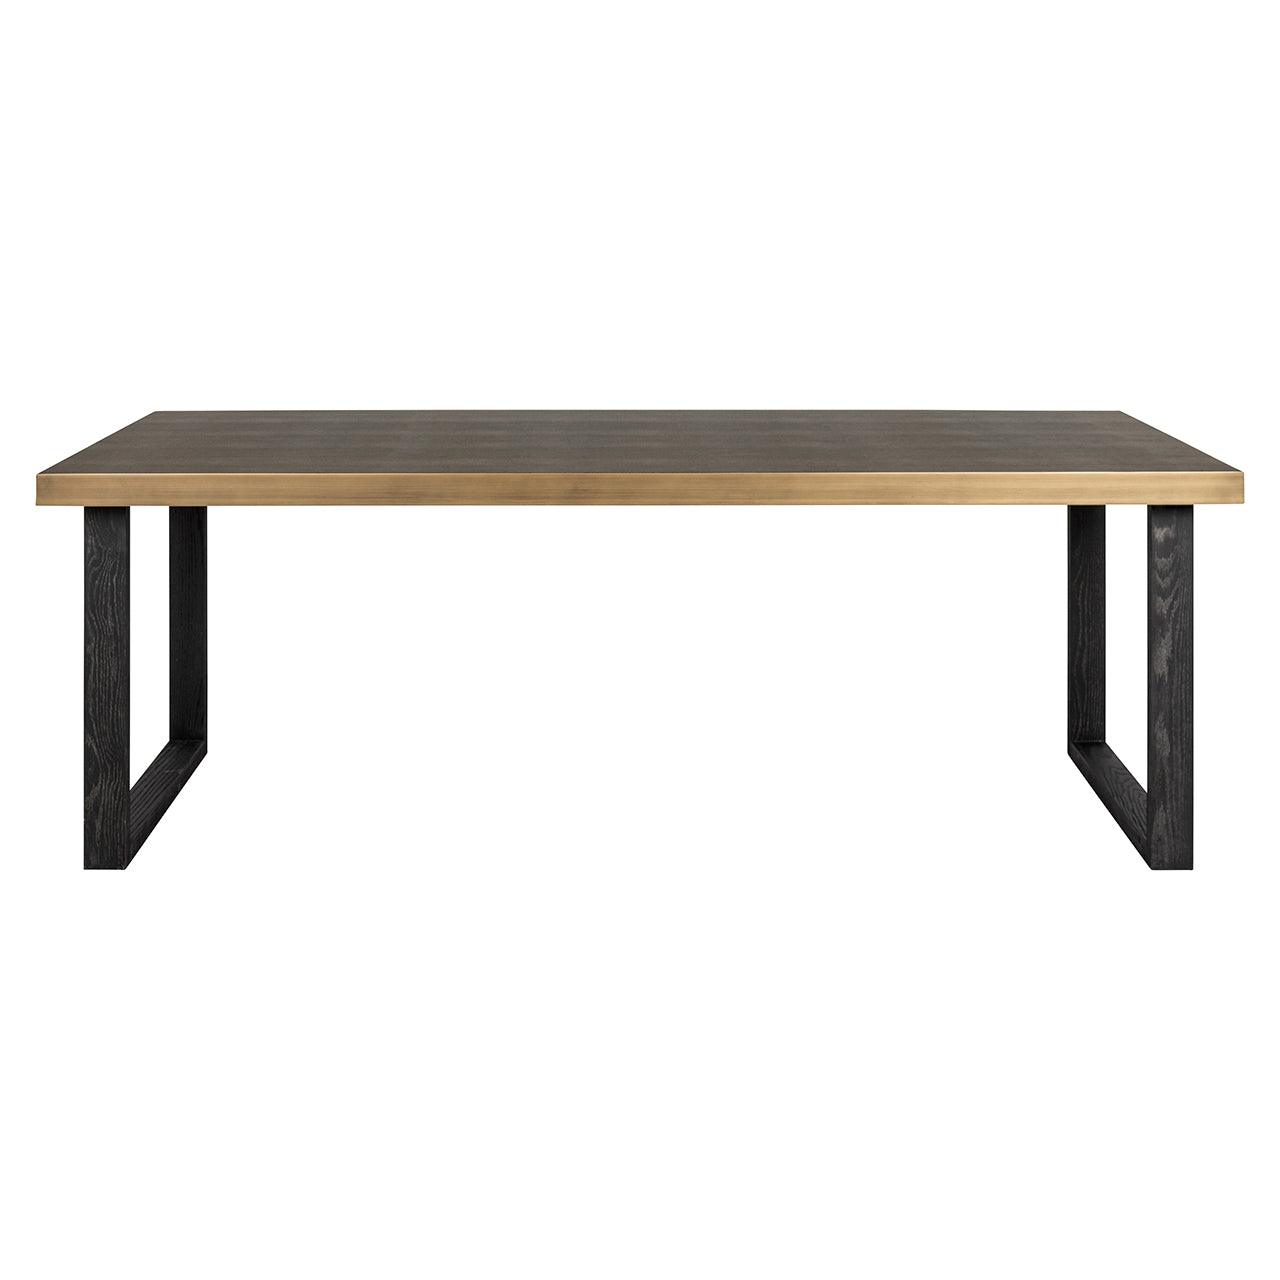 Bloomingville Shagreen Dining Table with Black Oak Wood Base by Richmond Interiors - Maison Rêves UK